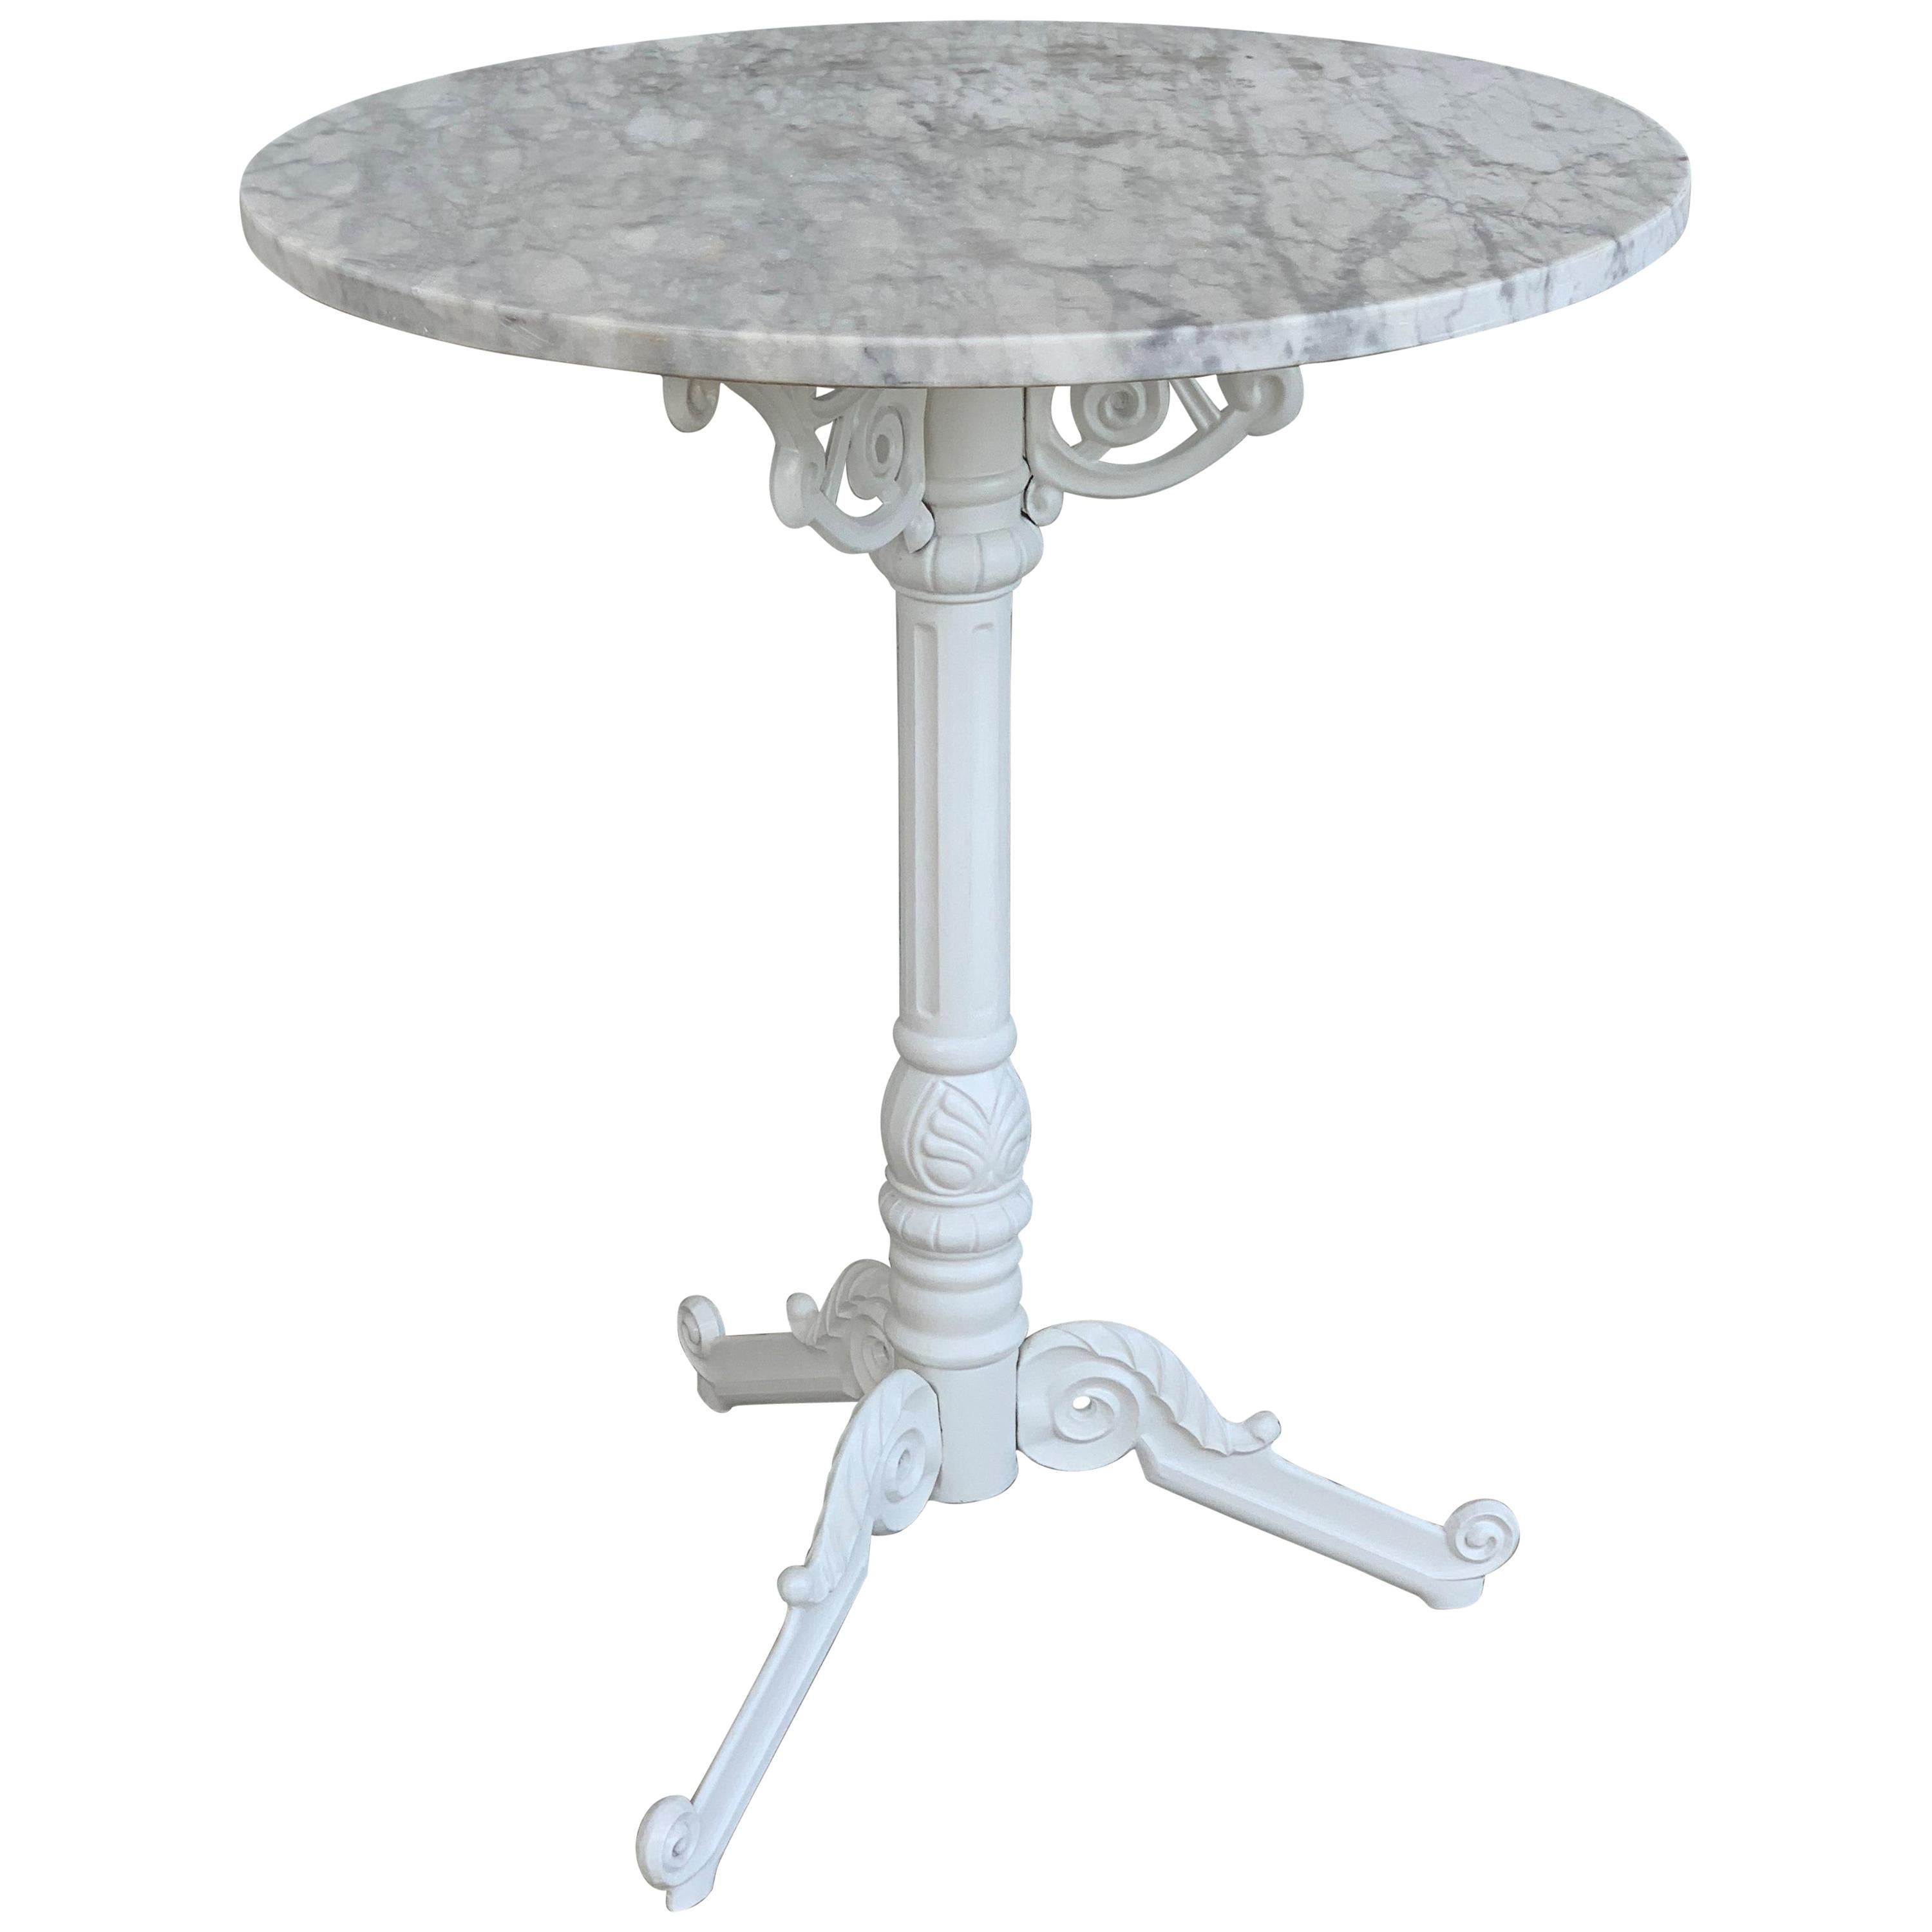 20th Century Round Cast Iron Base with Marble Top Garden Table or Bistro Table